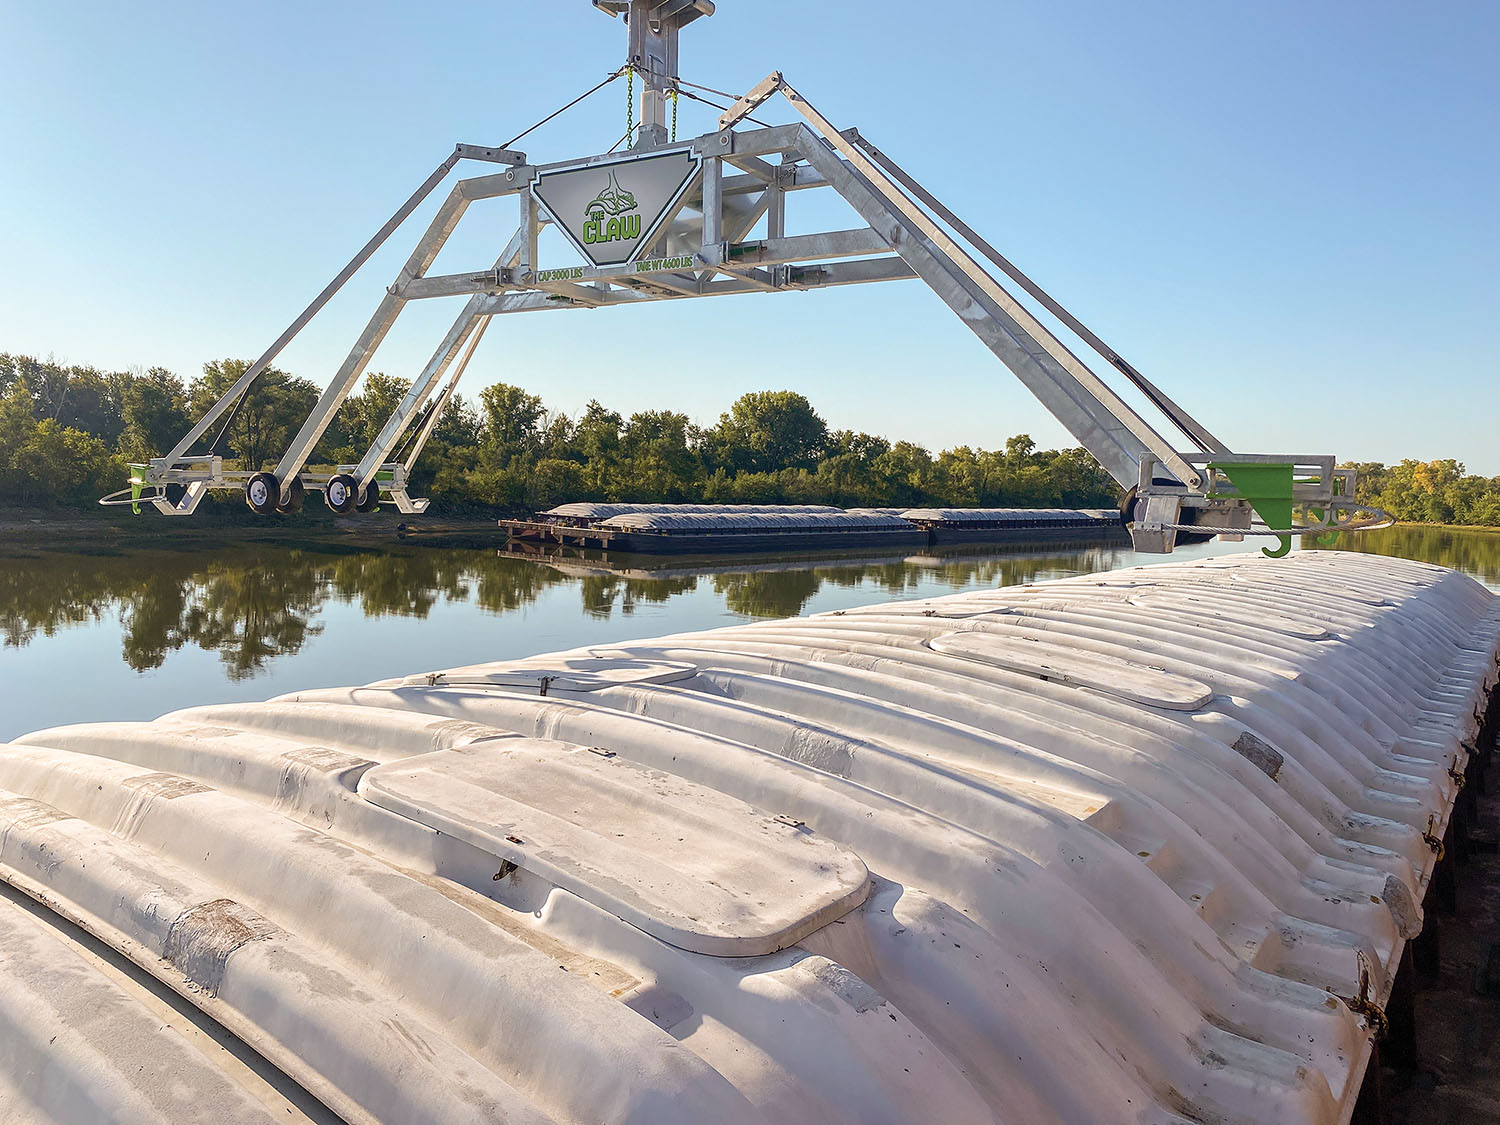 The Claw Lid Lifter is designed to remove and replace barge covers without needing to have people on the barge. (Photo courtesy of Chuck Gifford)